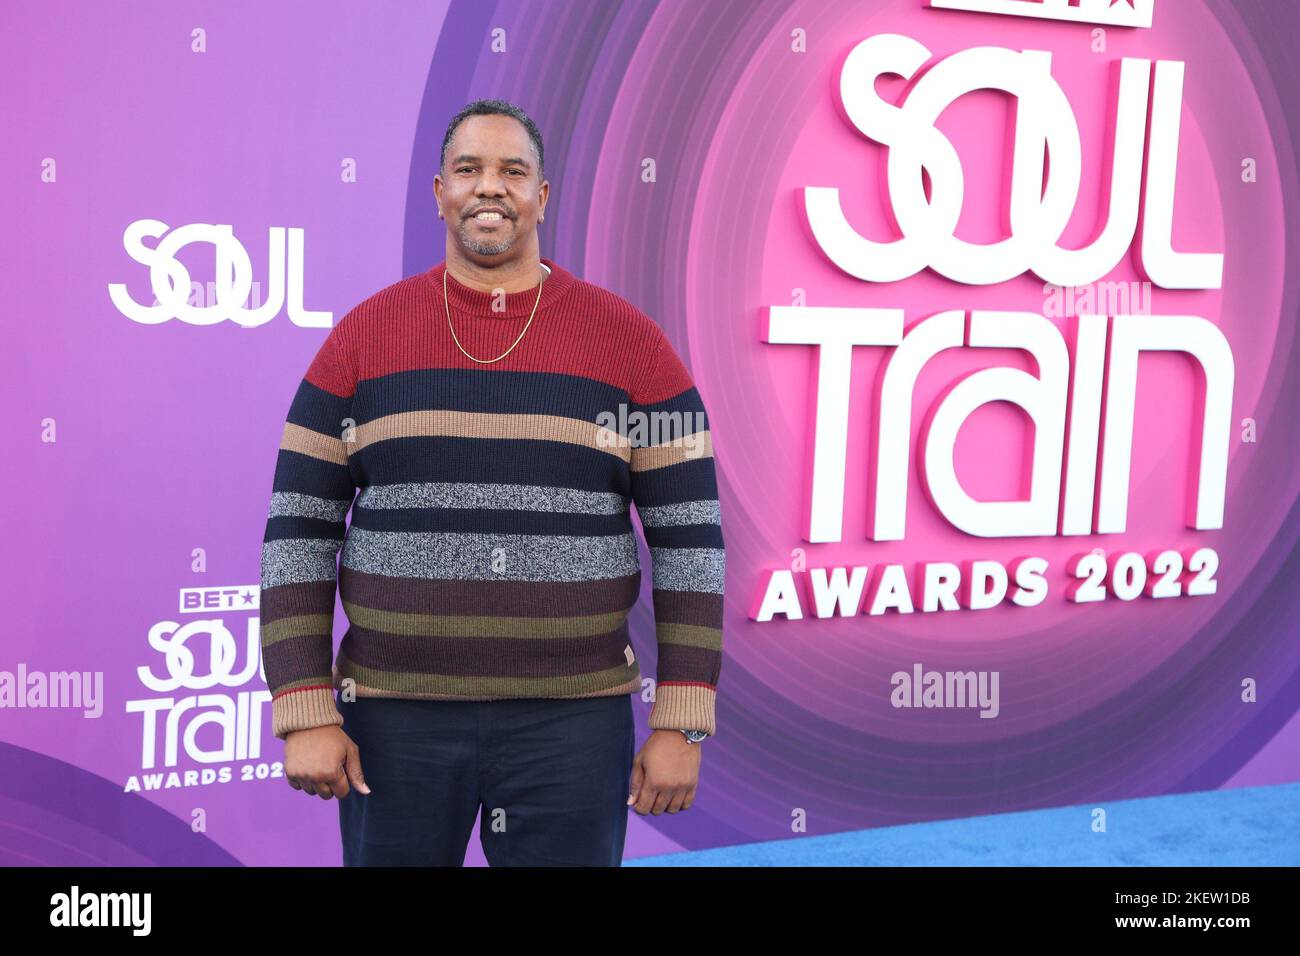 Las Vegas, NV, USA. 13th Nov, 2022. Senior Vice President of Digital Operations for BET Jason Odom at arrivals for Soul Train Awards 2022 - Part 1, Orleans Arena at Orleans Hotel and Casino, Las Vegas, NV November 13, 2022. Credit: JA/Everett Collection/Alamy Live News Stock Photo